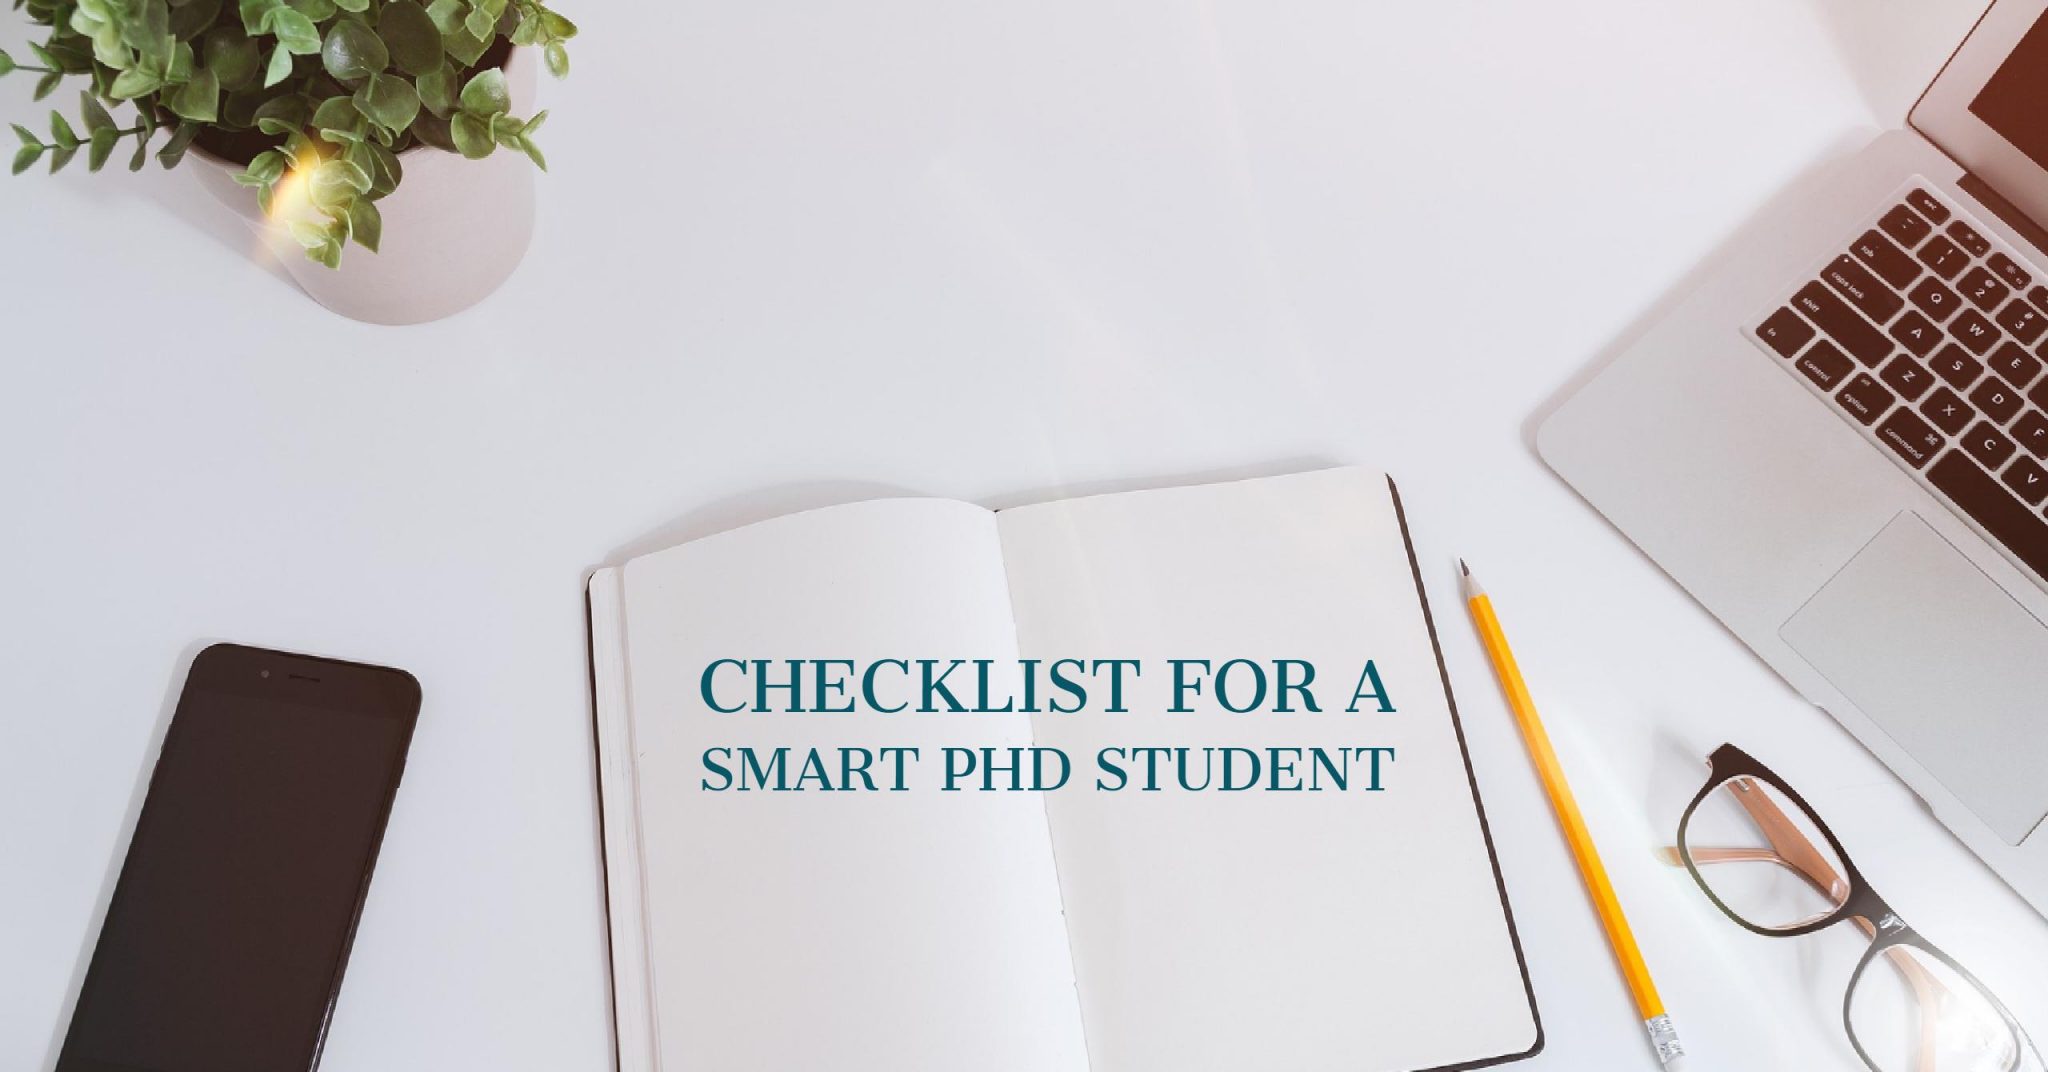 CHECKLIST FOR A SMART PHD STUDENT